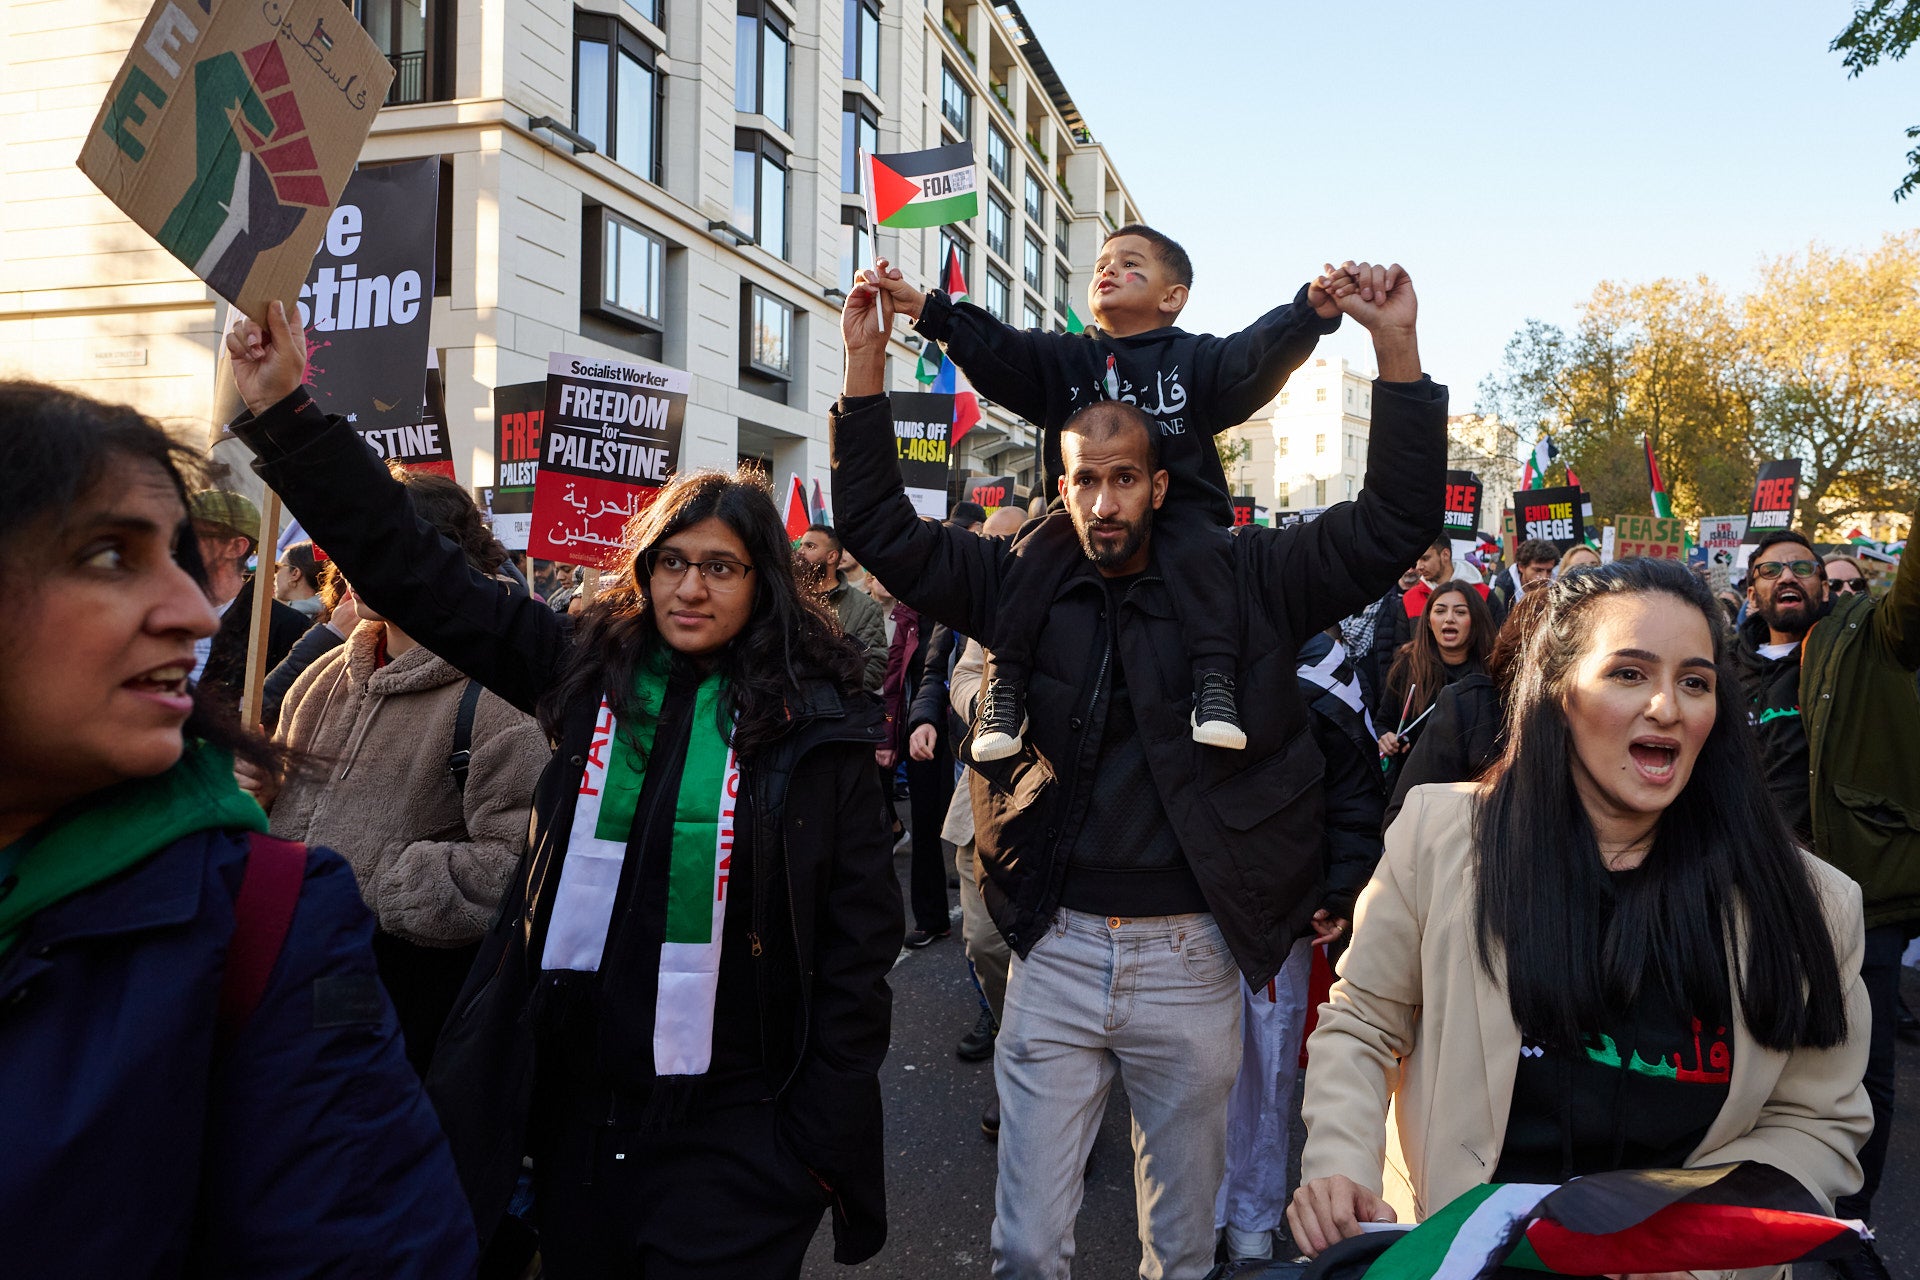 Protesters chant slogans on the Pro-Palestine march near the American Embassy